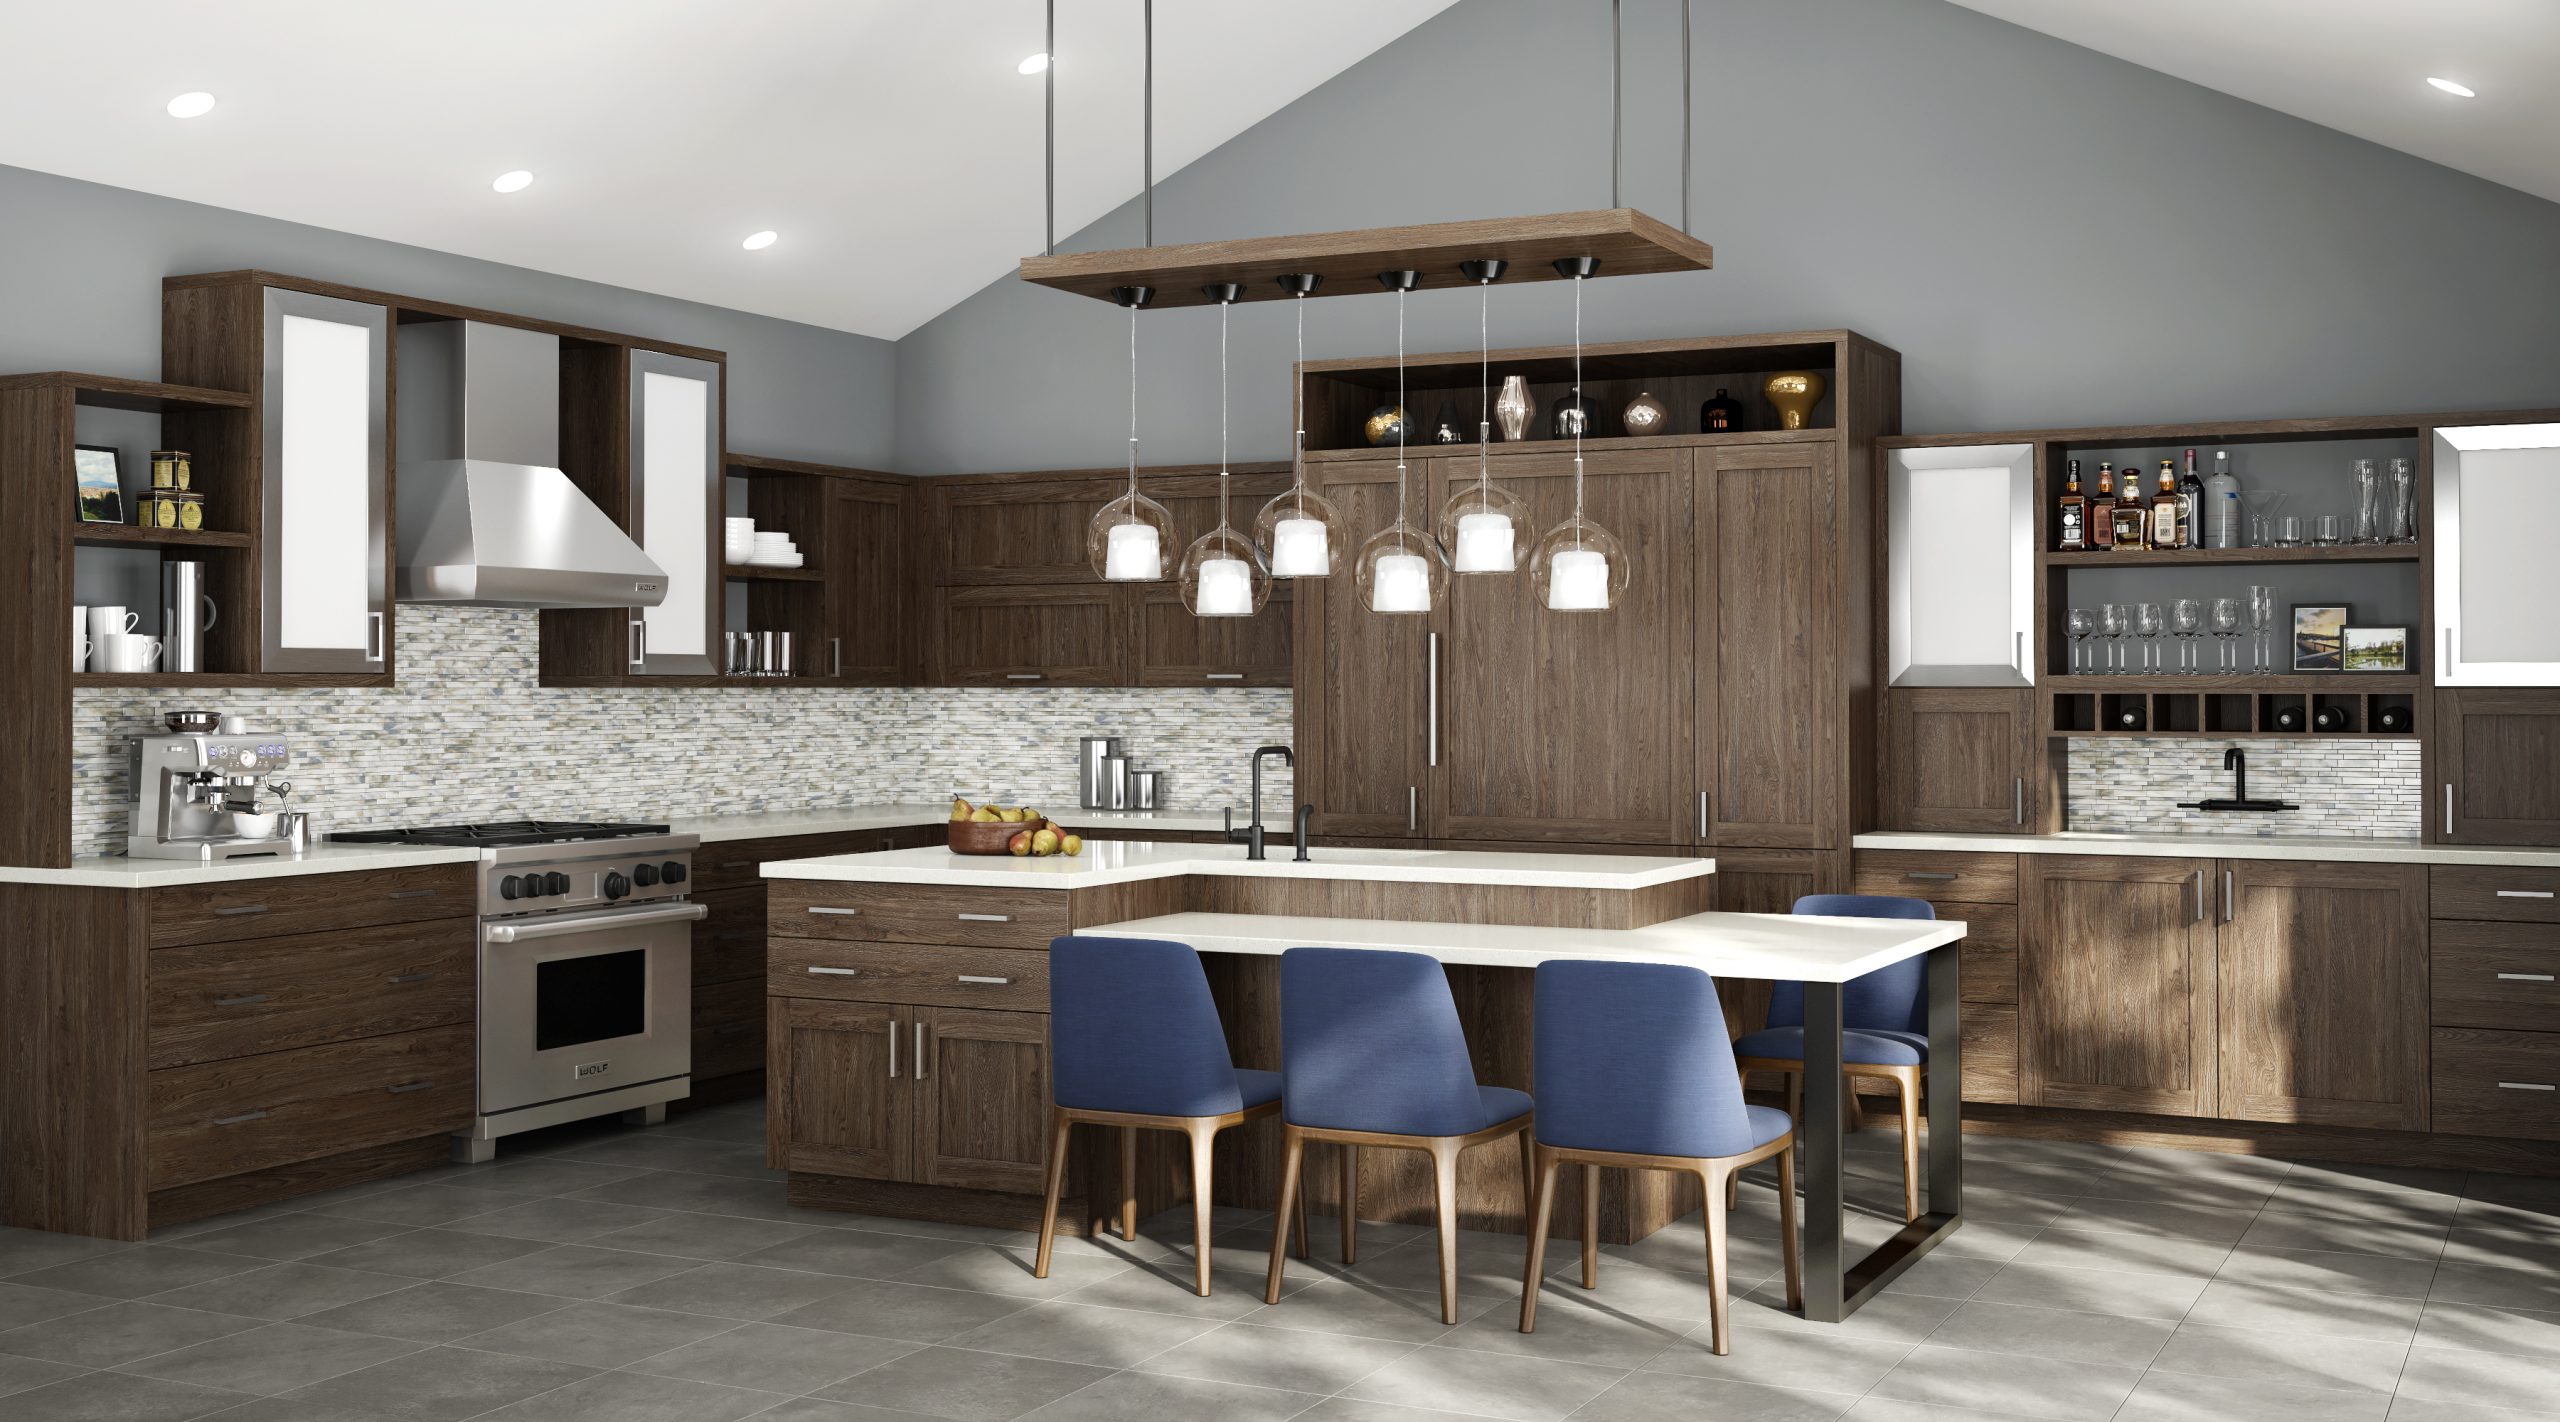 Kitchen Remodels And Color